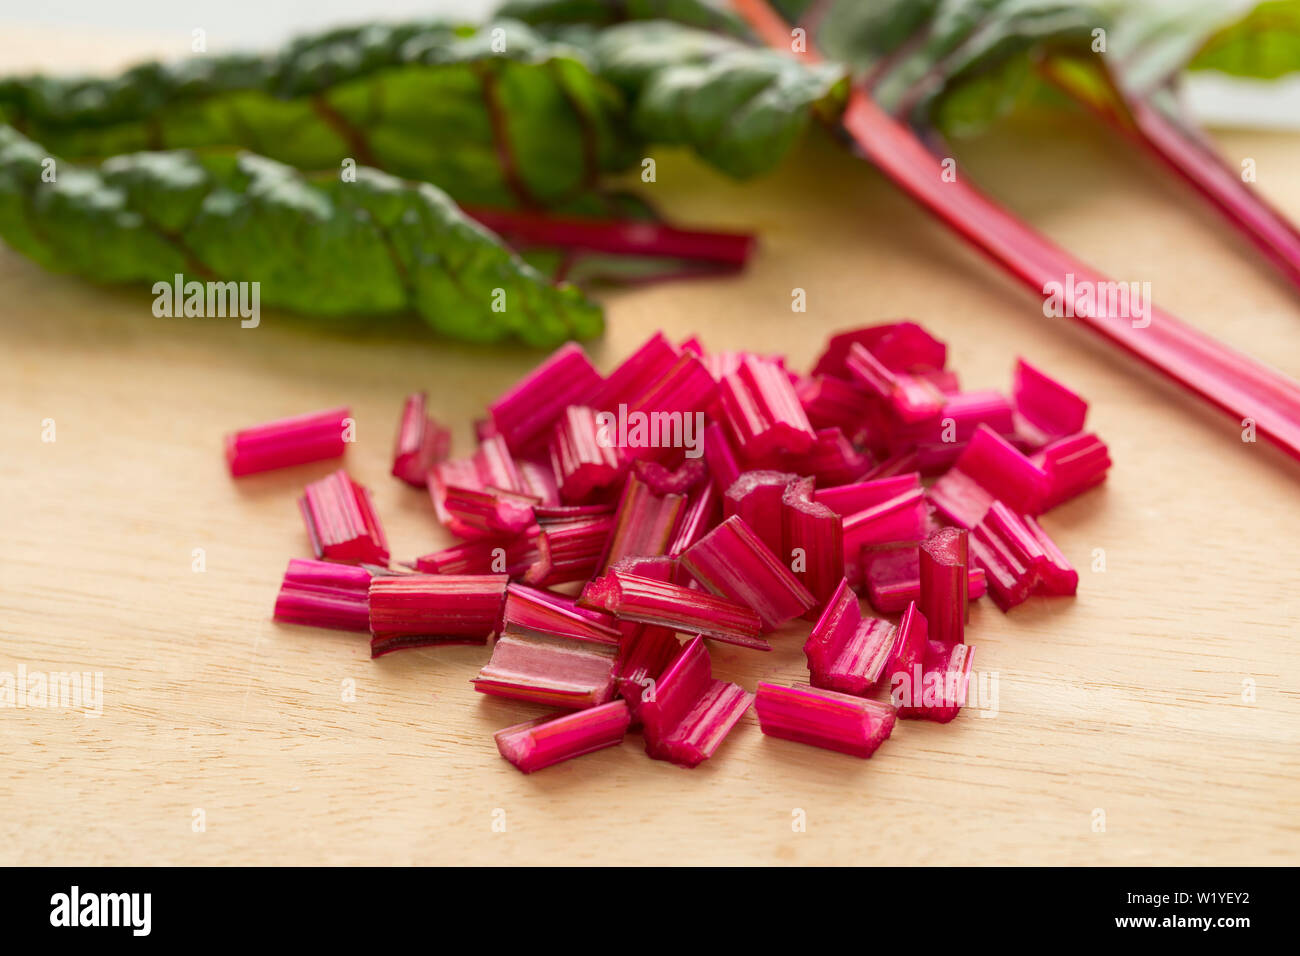 Red stemmed chard cut into pieces close up Stock Photo